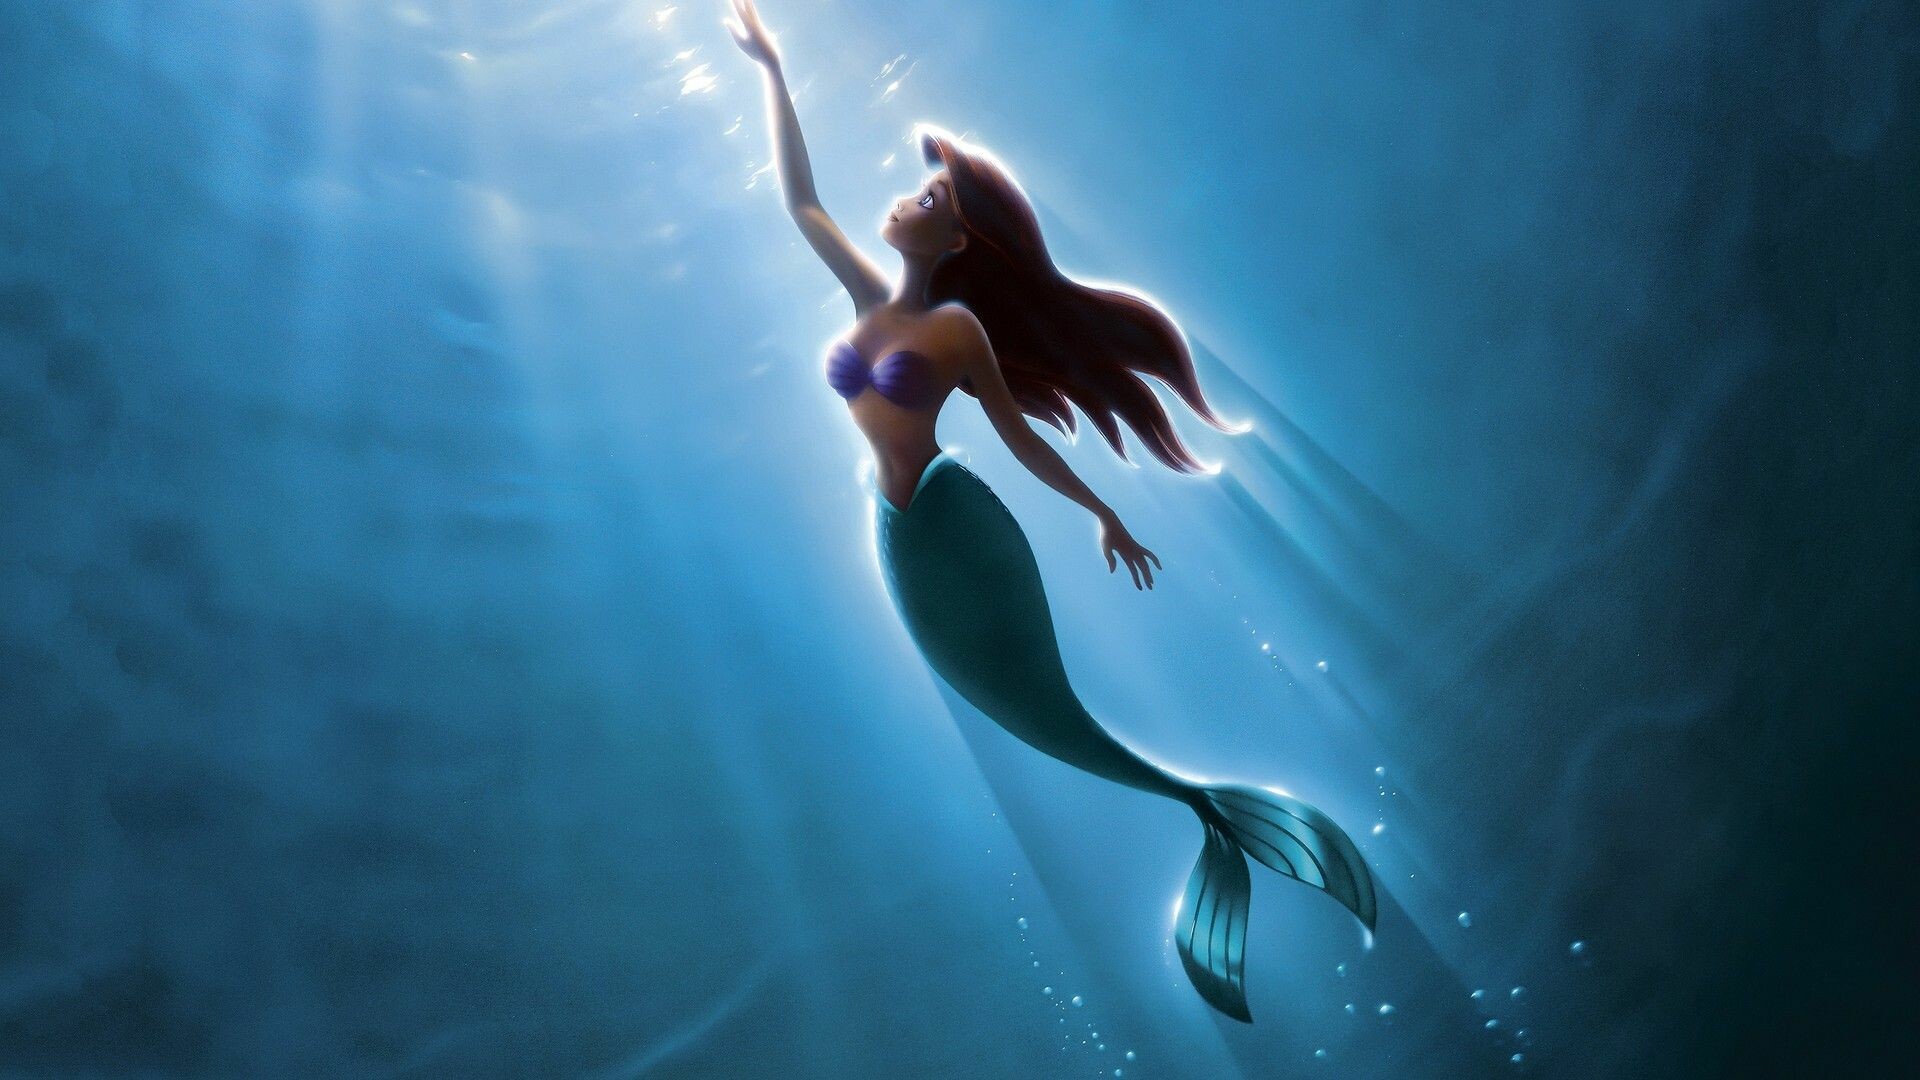 The Little Mermaid: A 16-year-old Ariel, A princess who's fascinated with life on land. 1920x1080 Full HD Wallpaper.